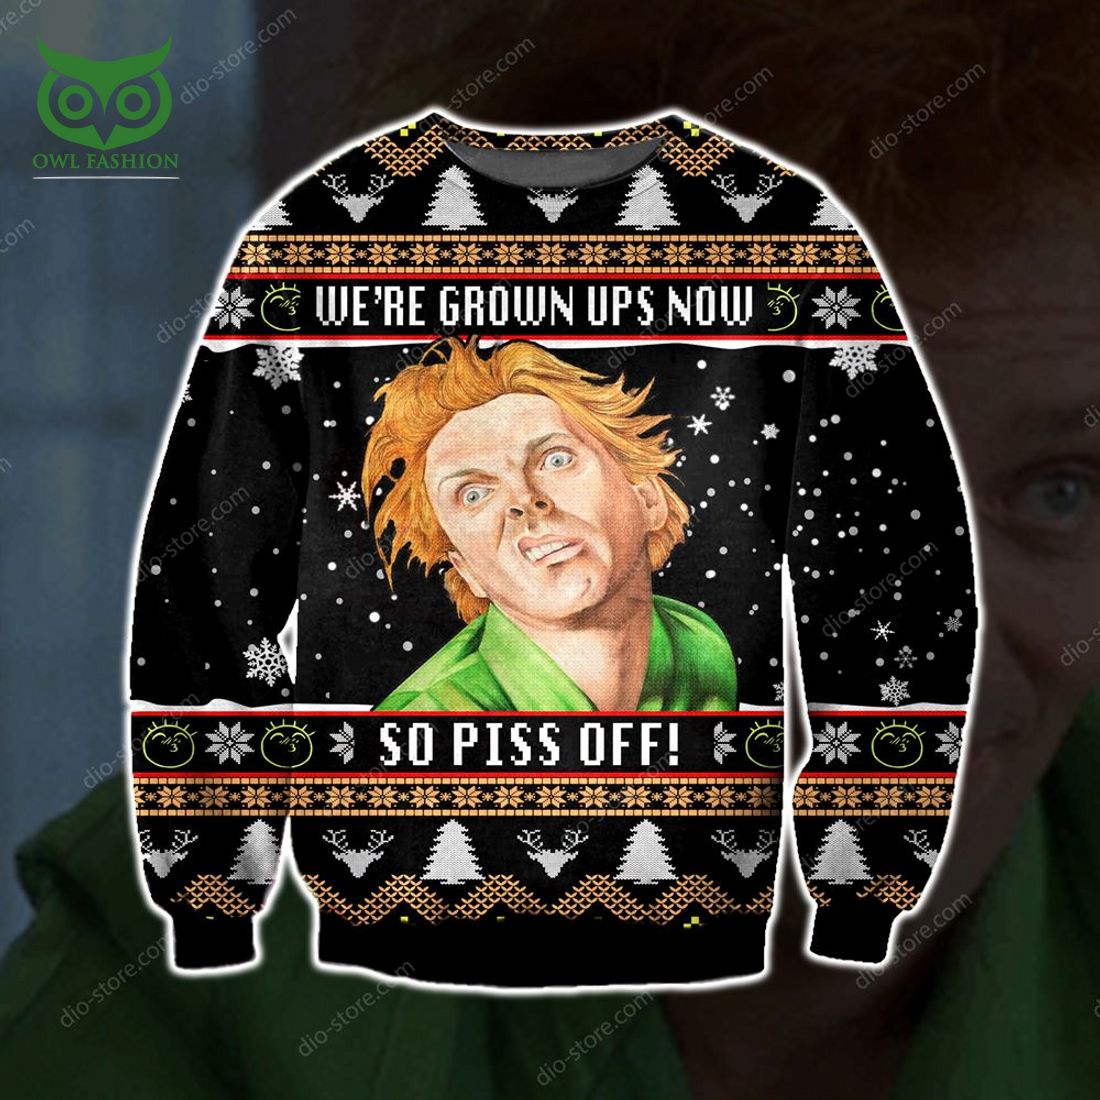 were grown up now so piss off knitting pattern 3d print ugly sweater sweatshirt christmas 1 xJqEt